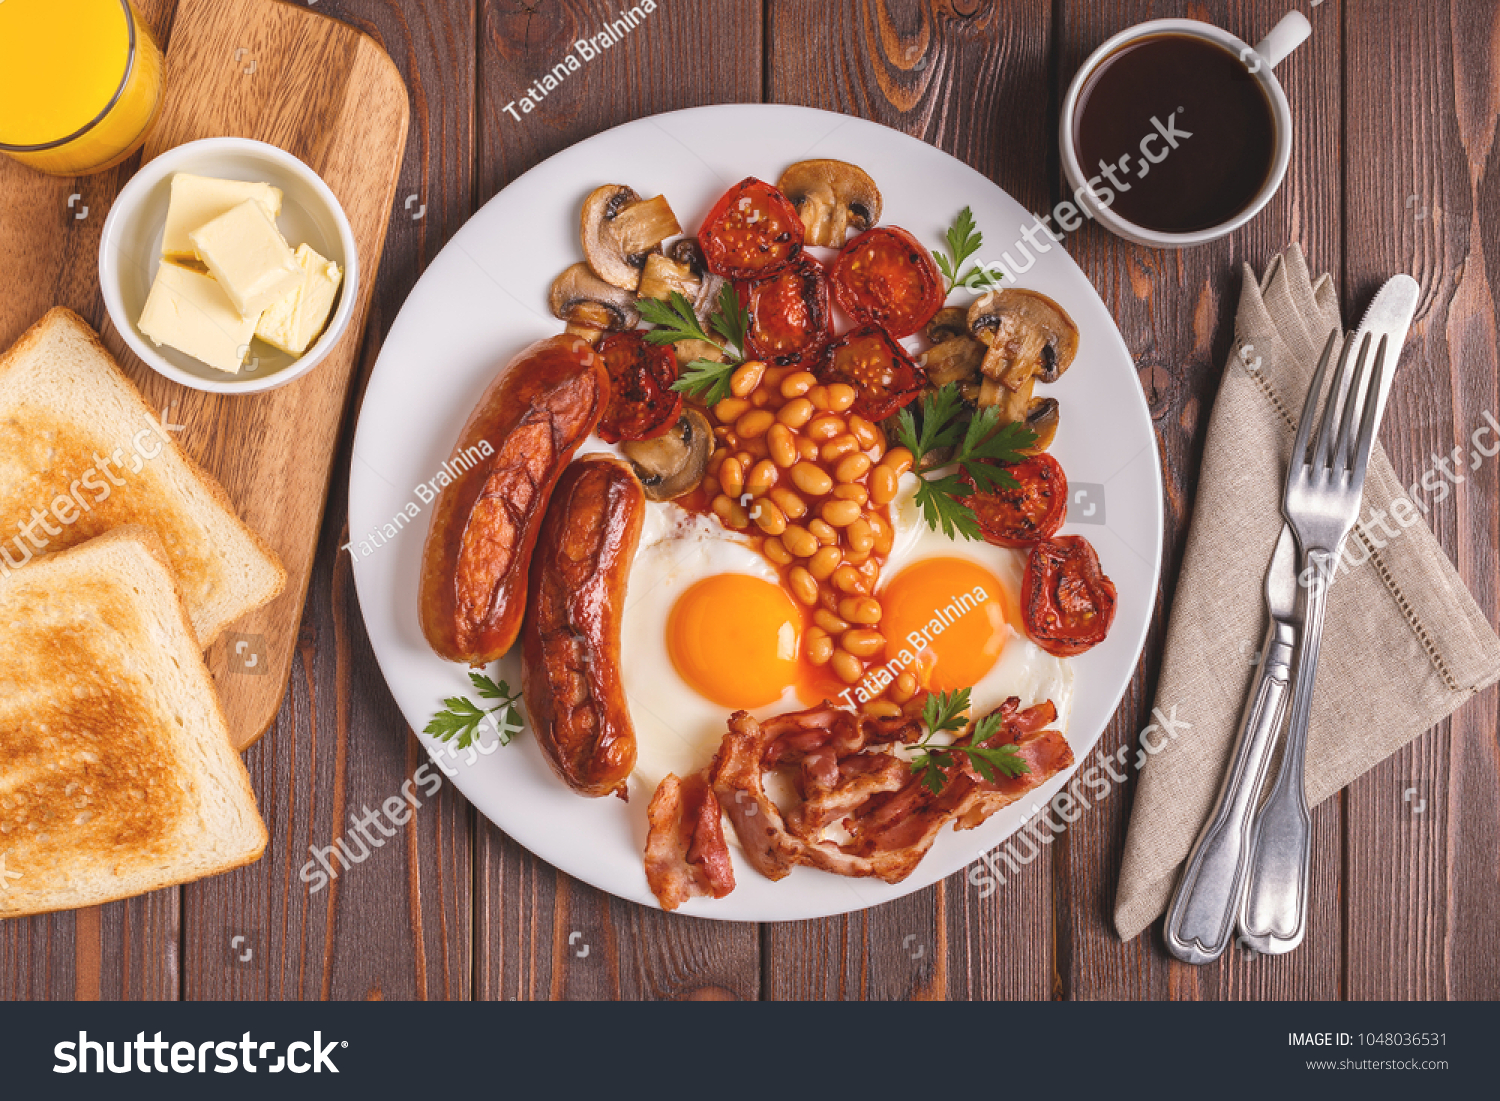 Traditional full English breakfast with fried eggs, sausages, beans, mushrooms, grilled tomatoes and bacon on wooden background. Top view #1048036531